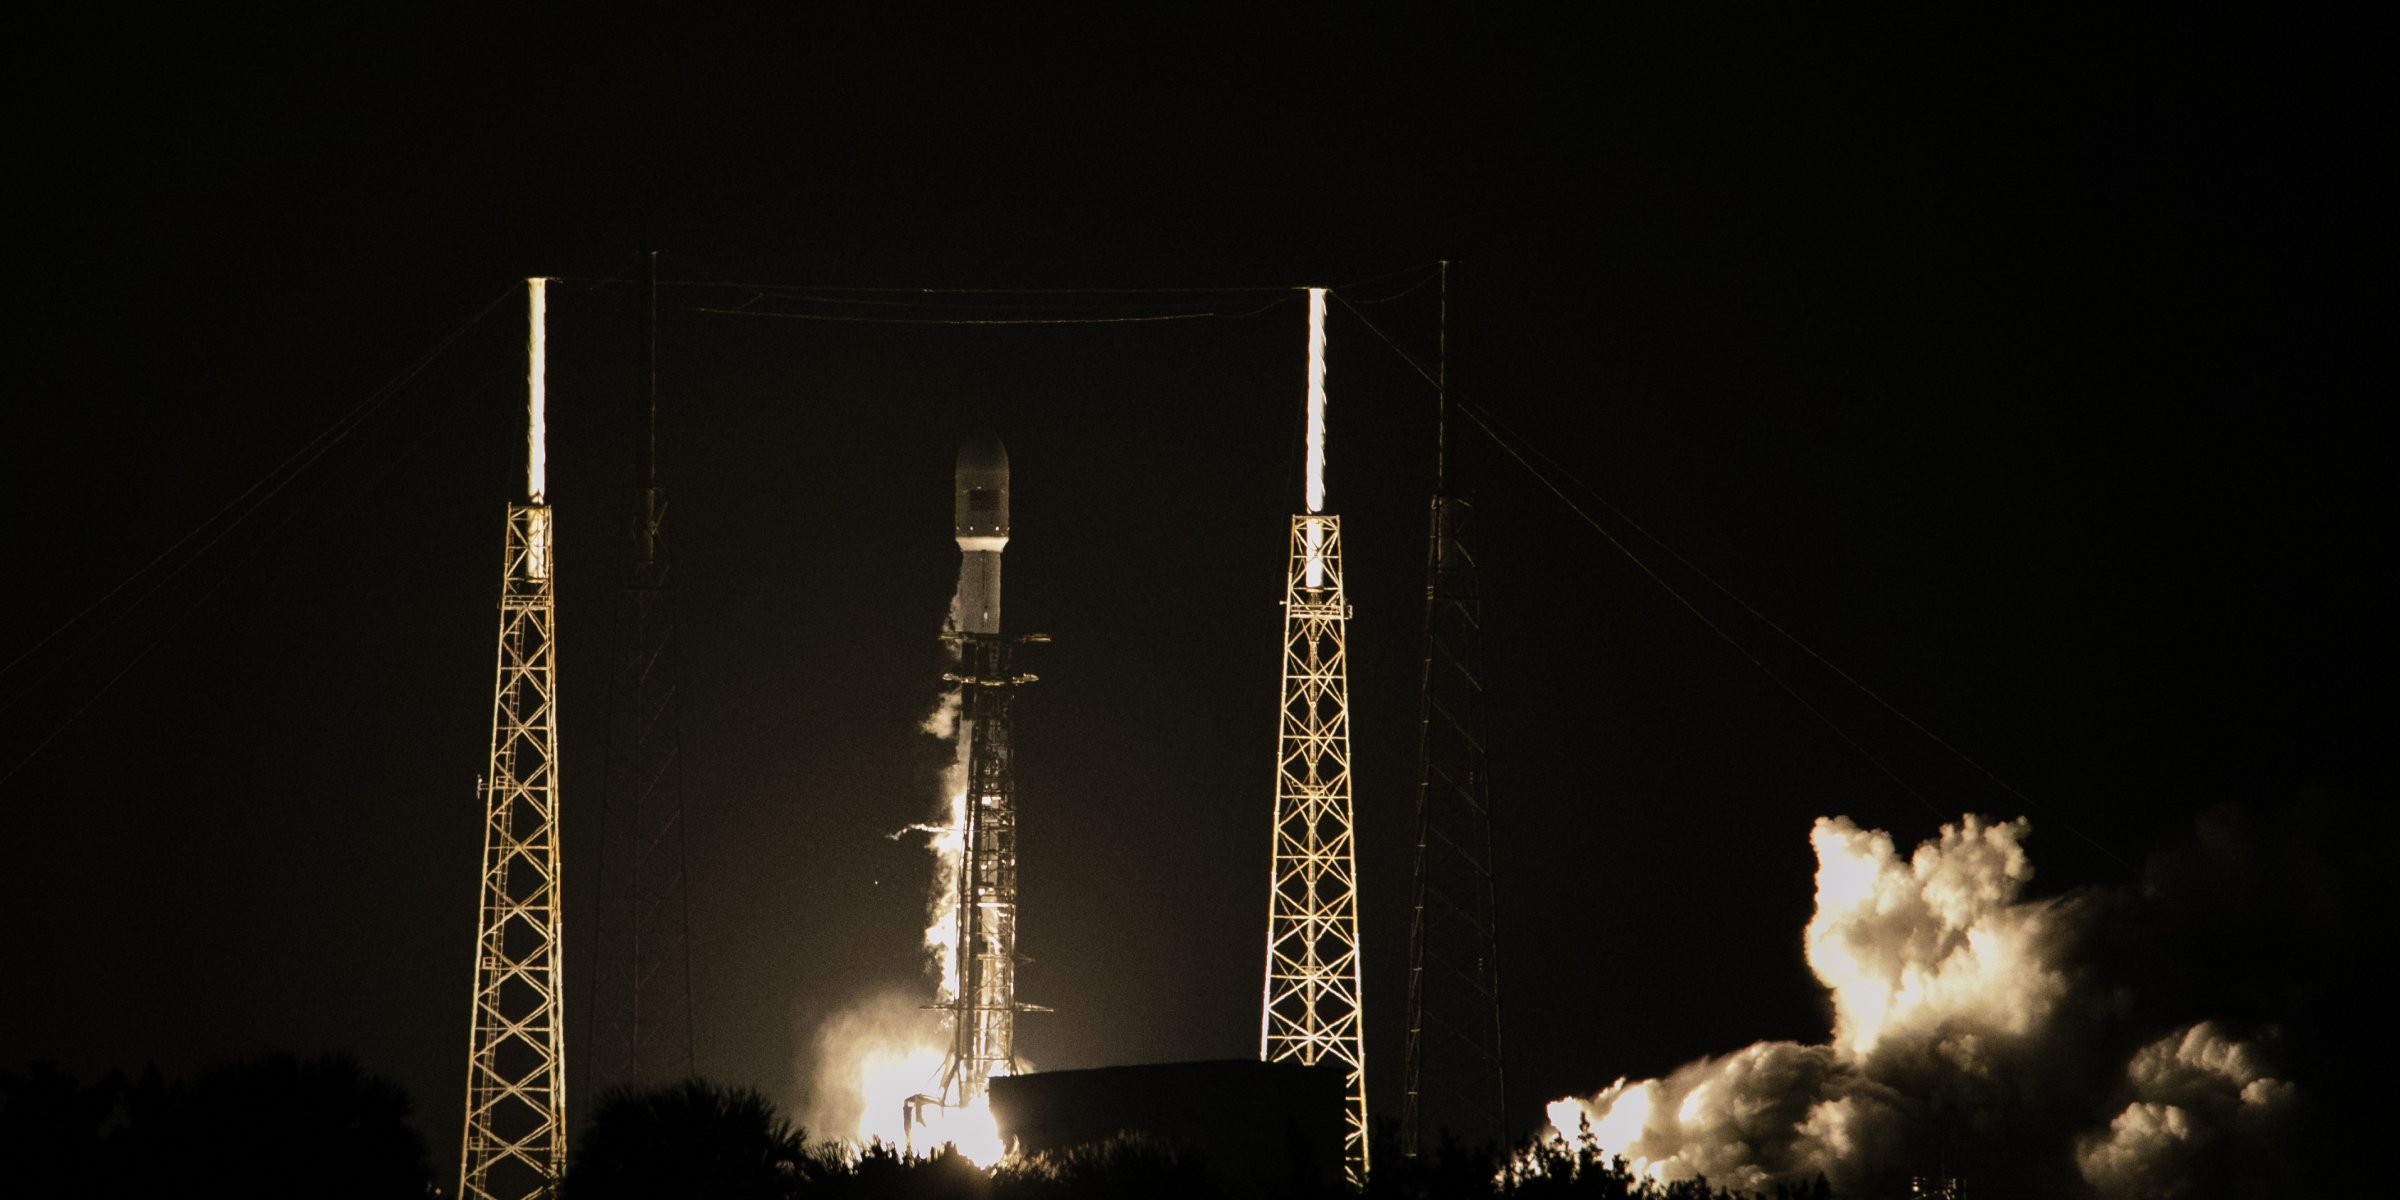 Turkey secures its orbital rights after the successful launch of the 7th satellite